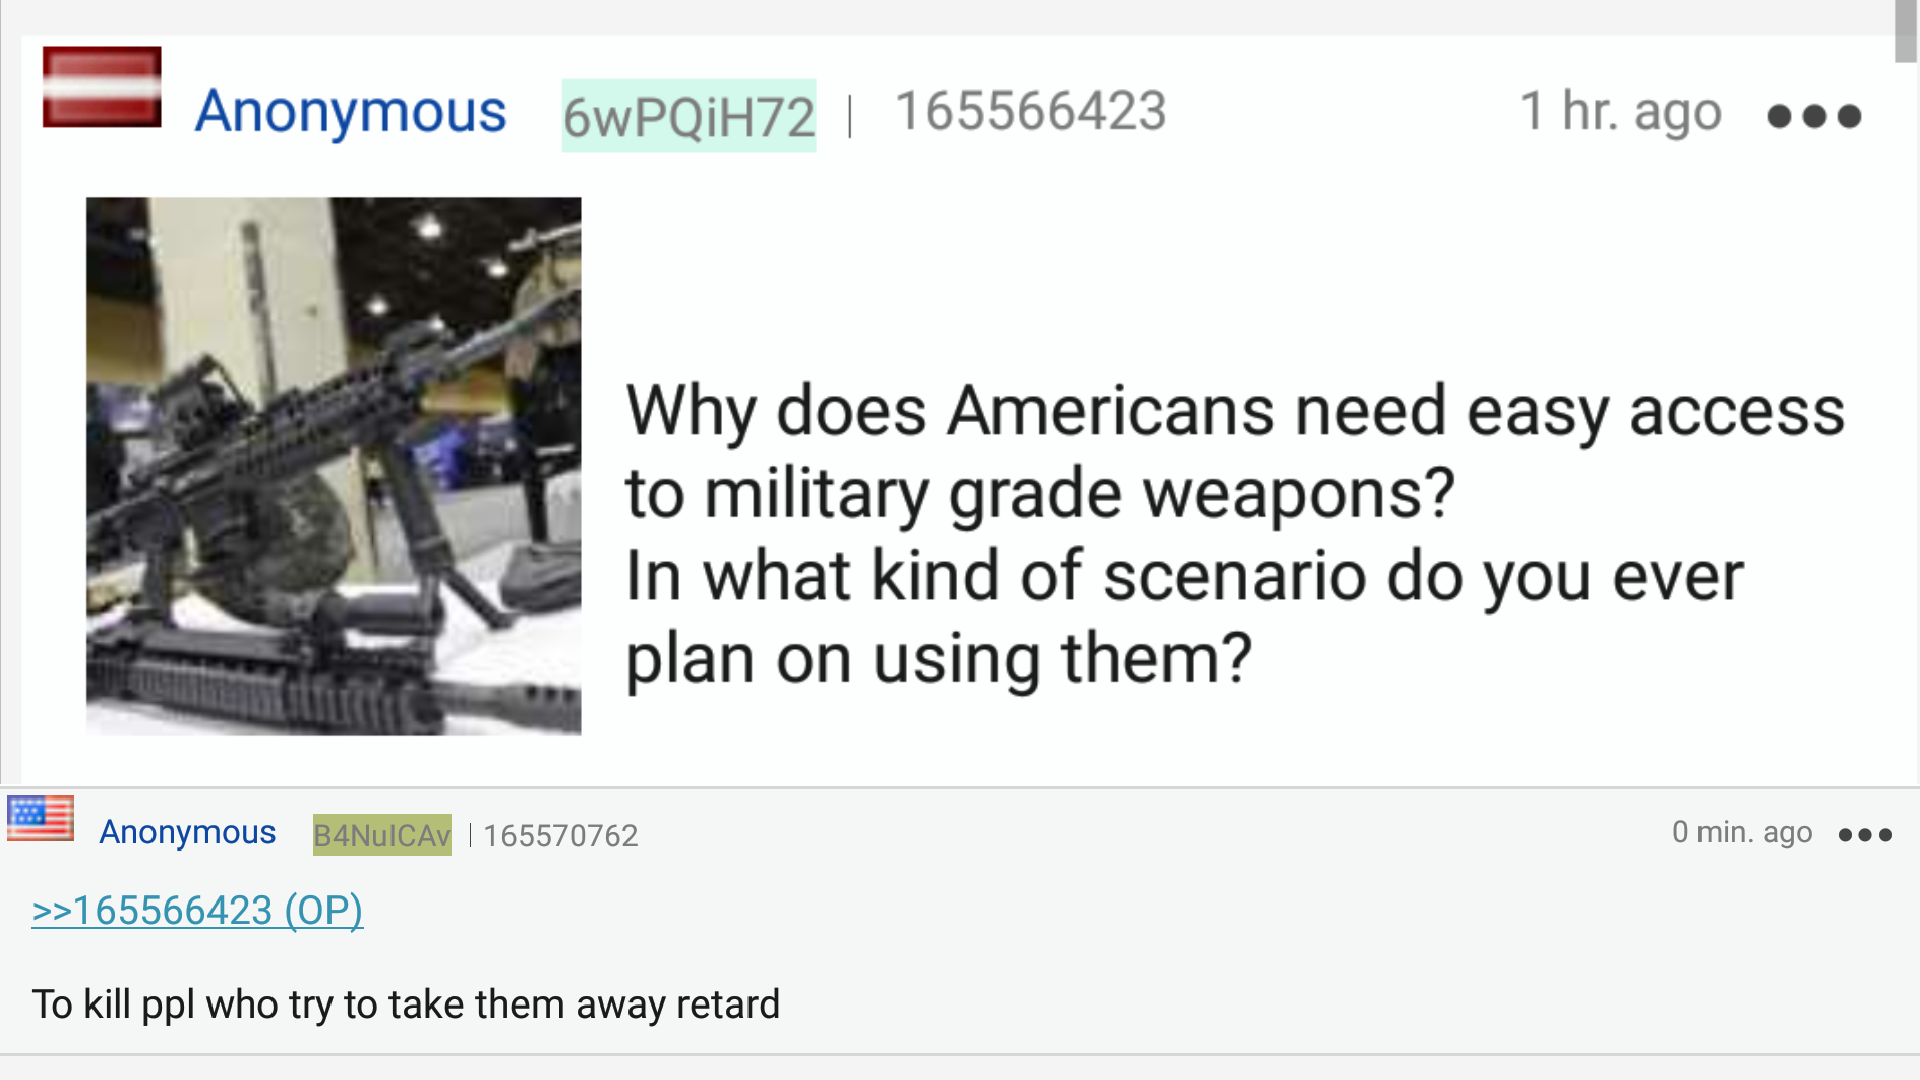 Anon comes up with a convincing argument